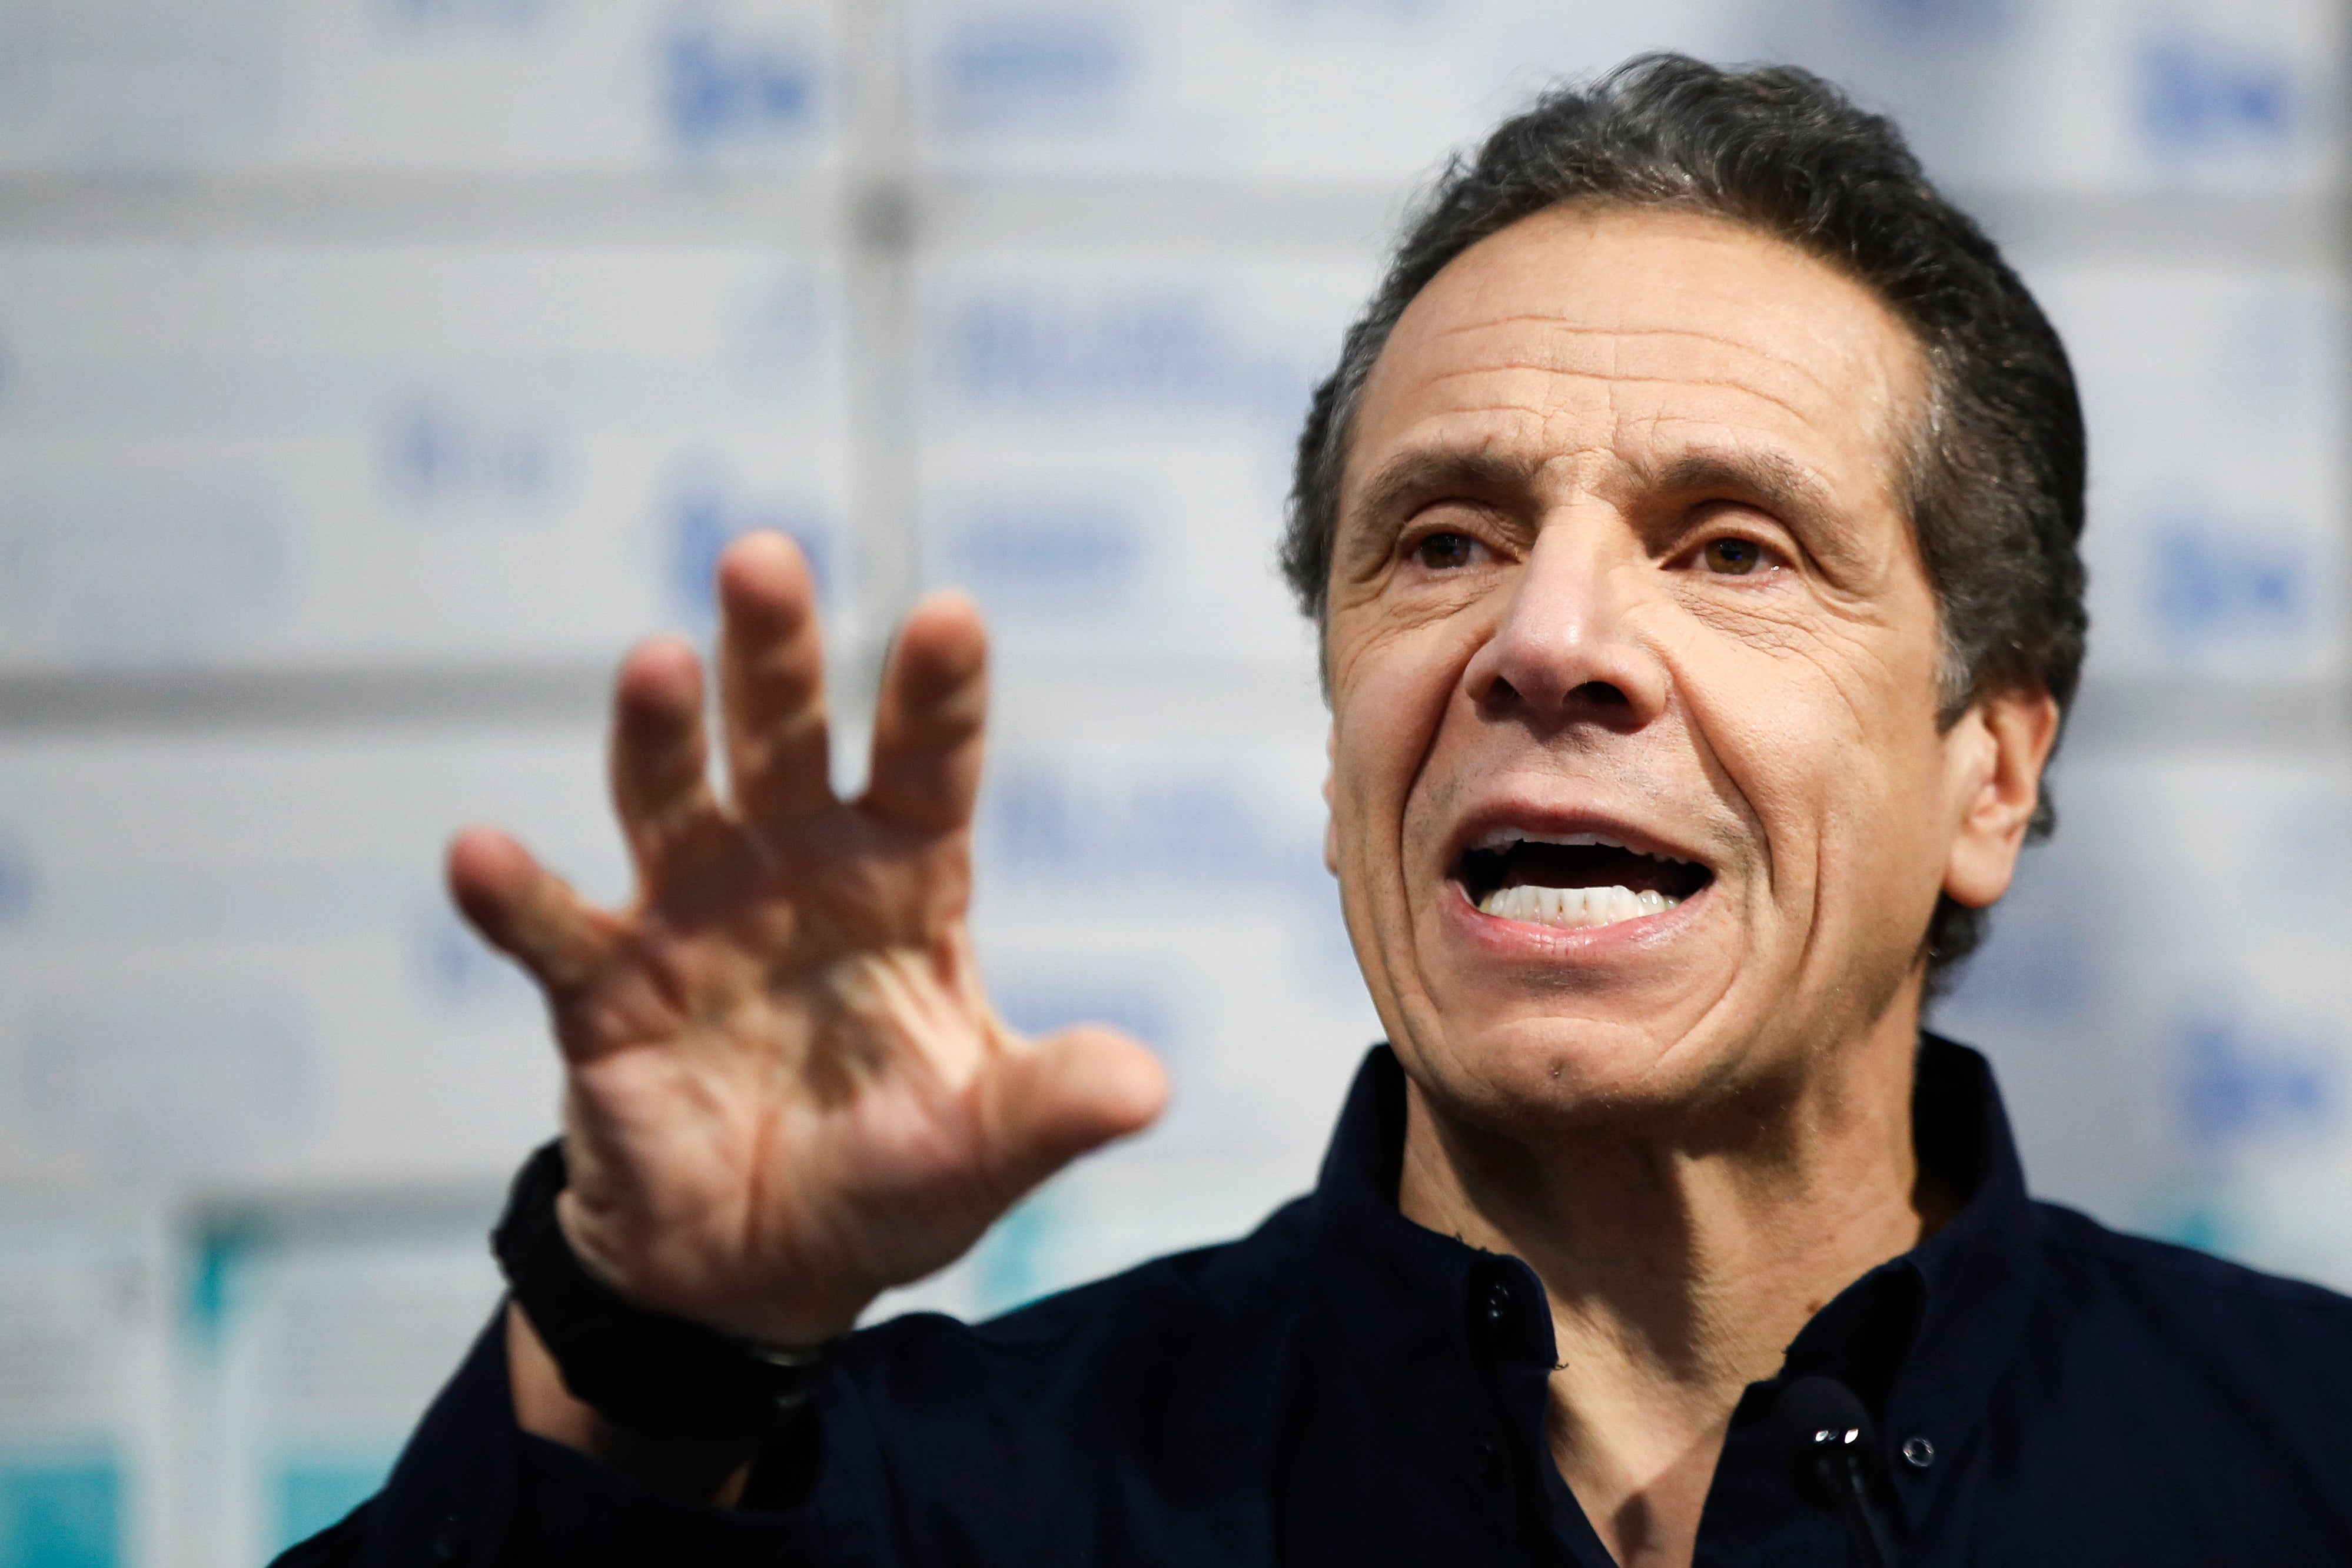 Andrew Cuomo issued a statement following allegations of harassment